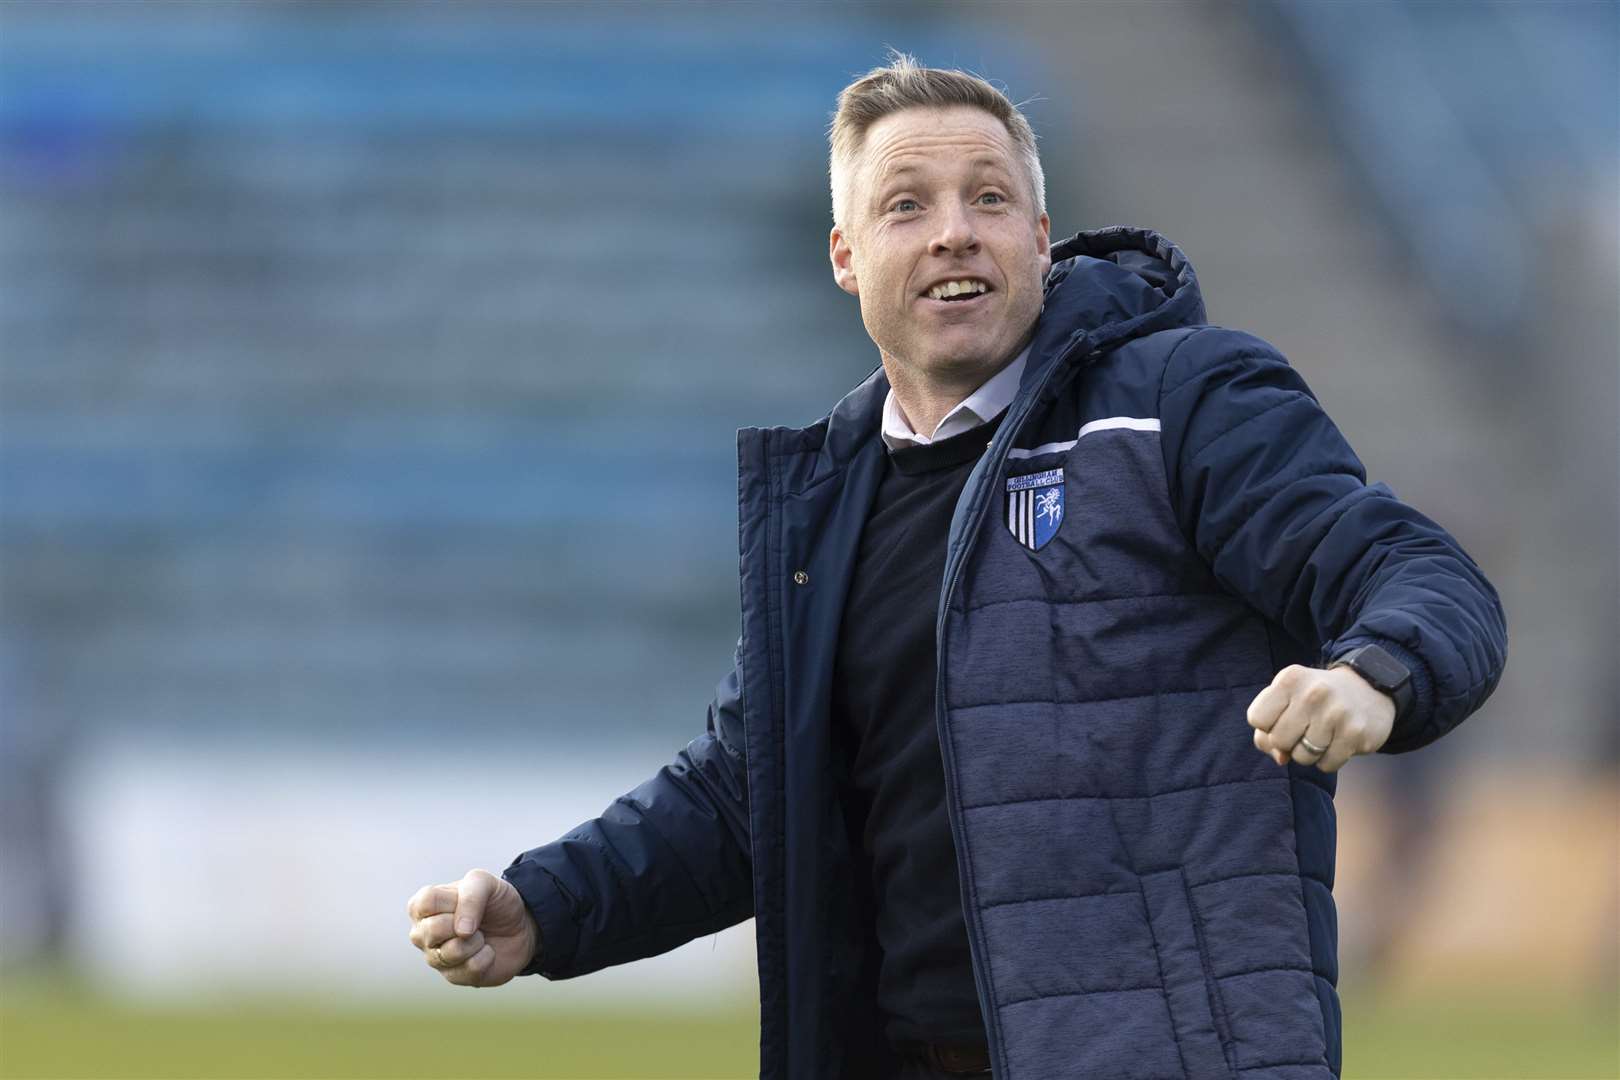 Gillingham boss Neil Harris not prepared to stand still as he looks to keep on improving his side